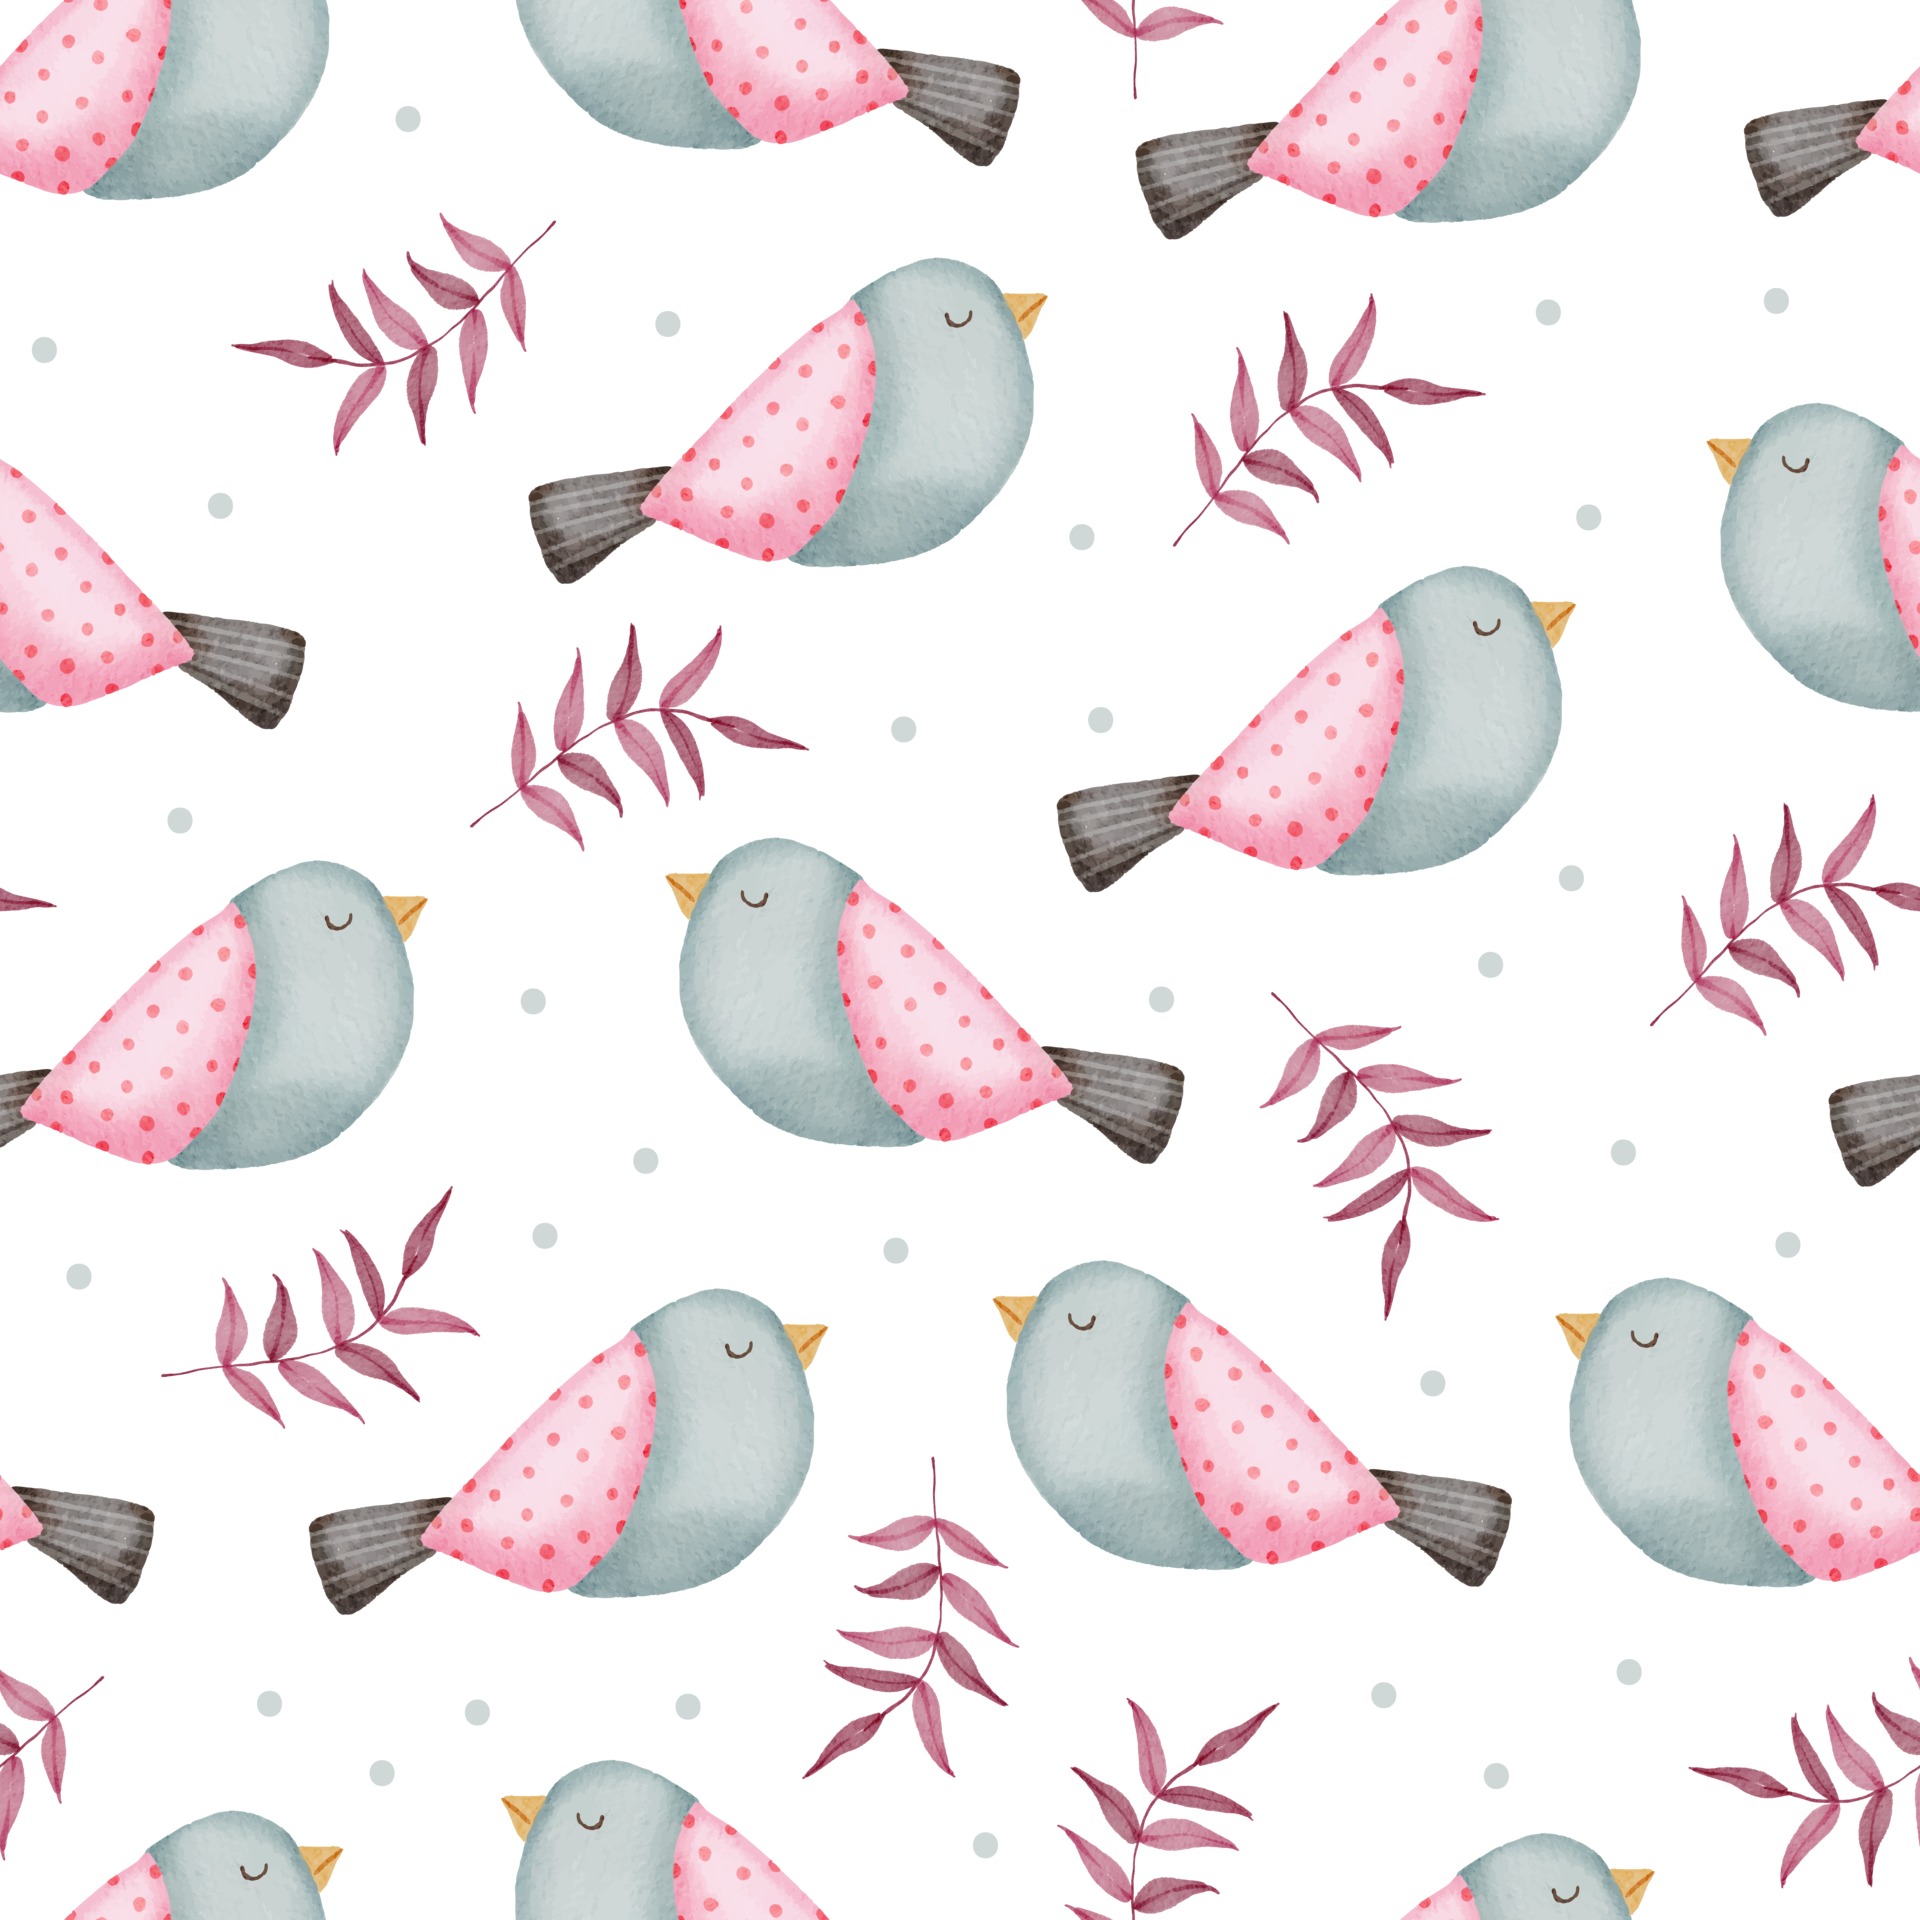 Valentine seamless pattern with birds, leaves and more on a png background. Perfect for wallpaper, web page background, textile, greeting cards and wedding invitations